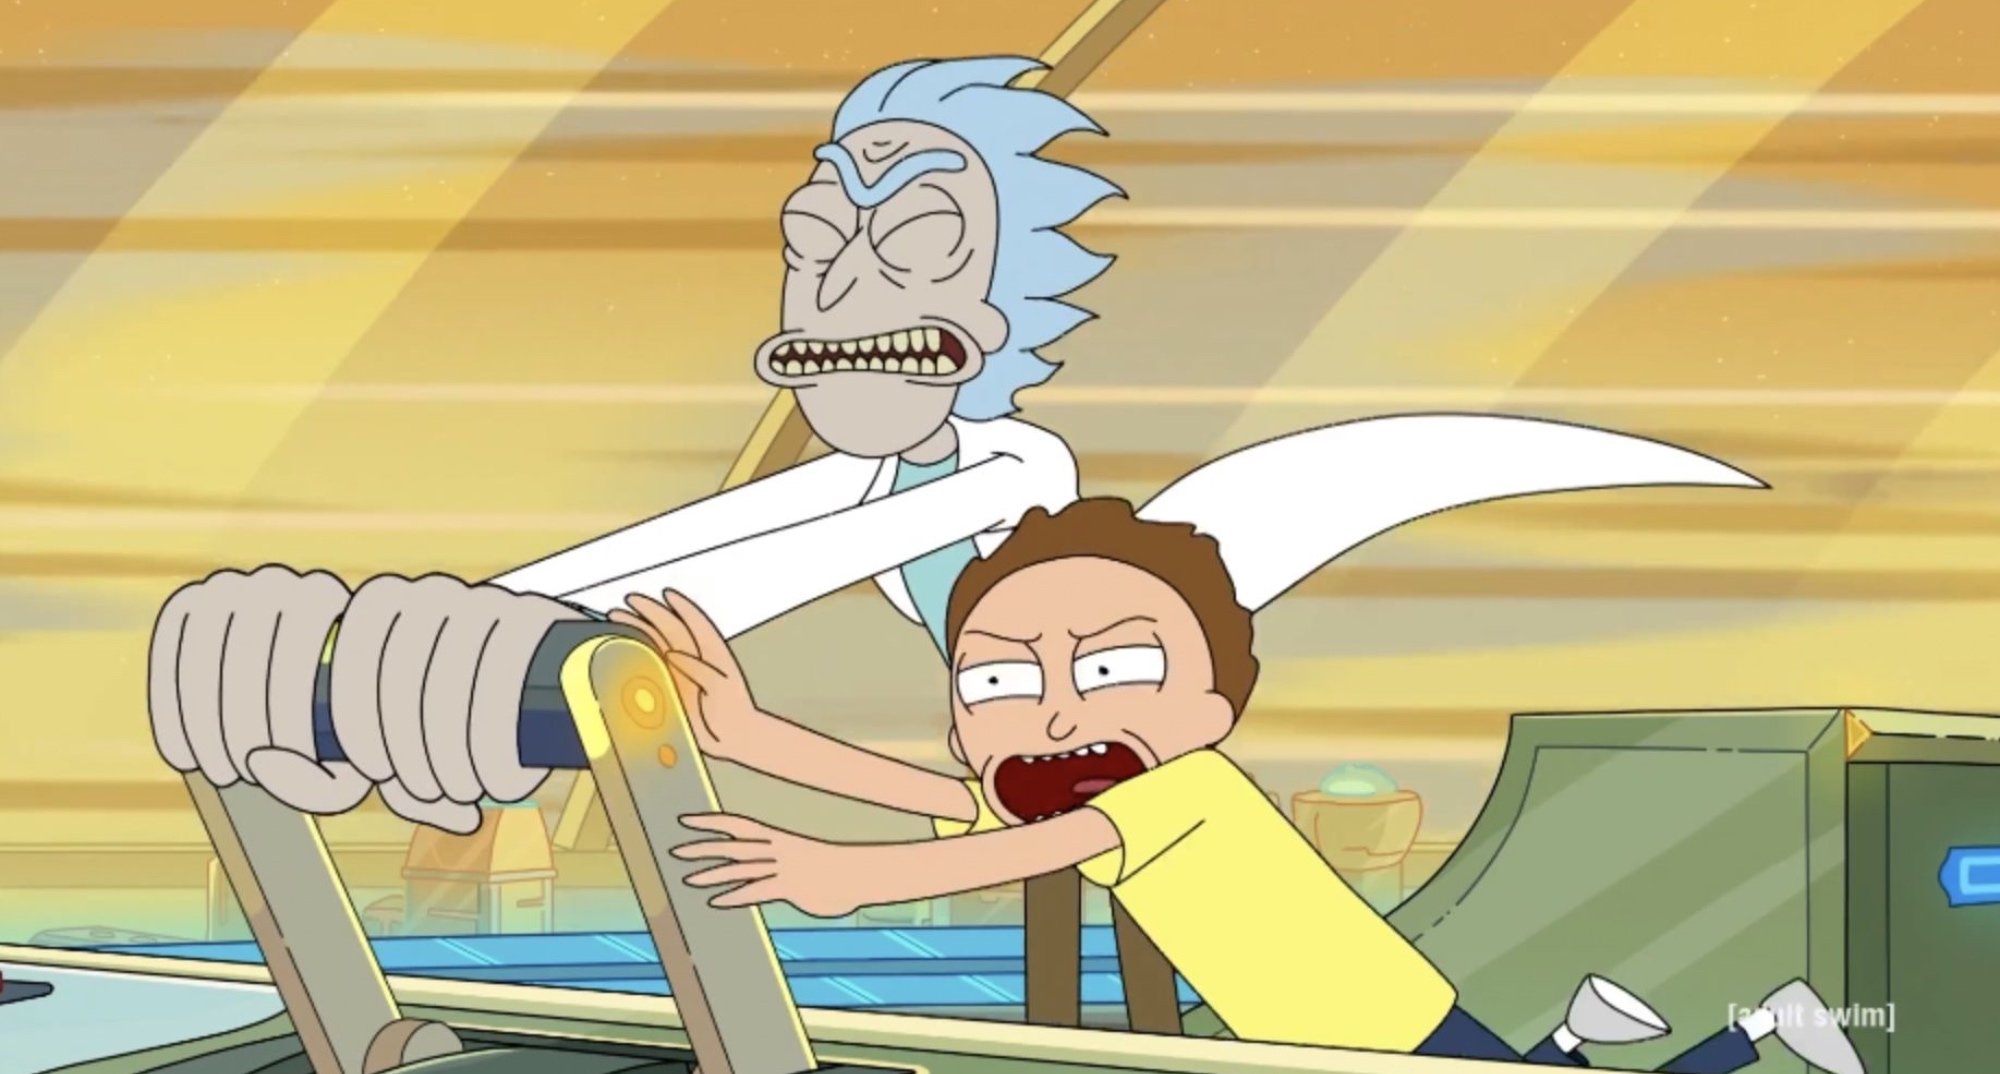 Character Rick and Morty in 'Rick and Morty' Season 5 finale driving ship in relation to season 6.